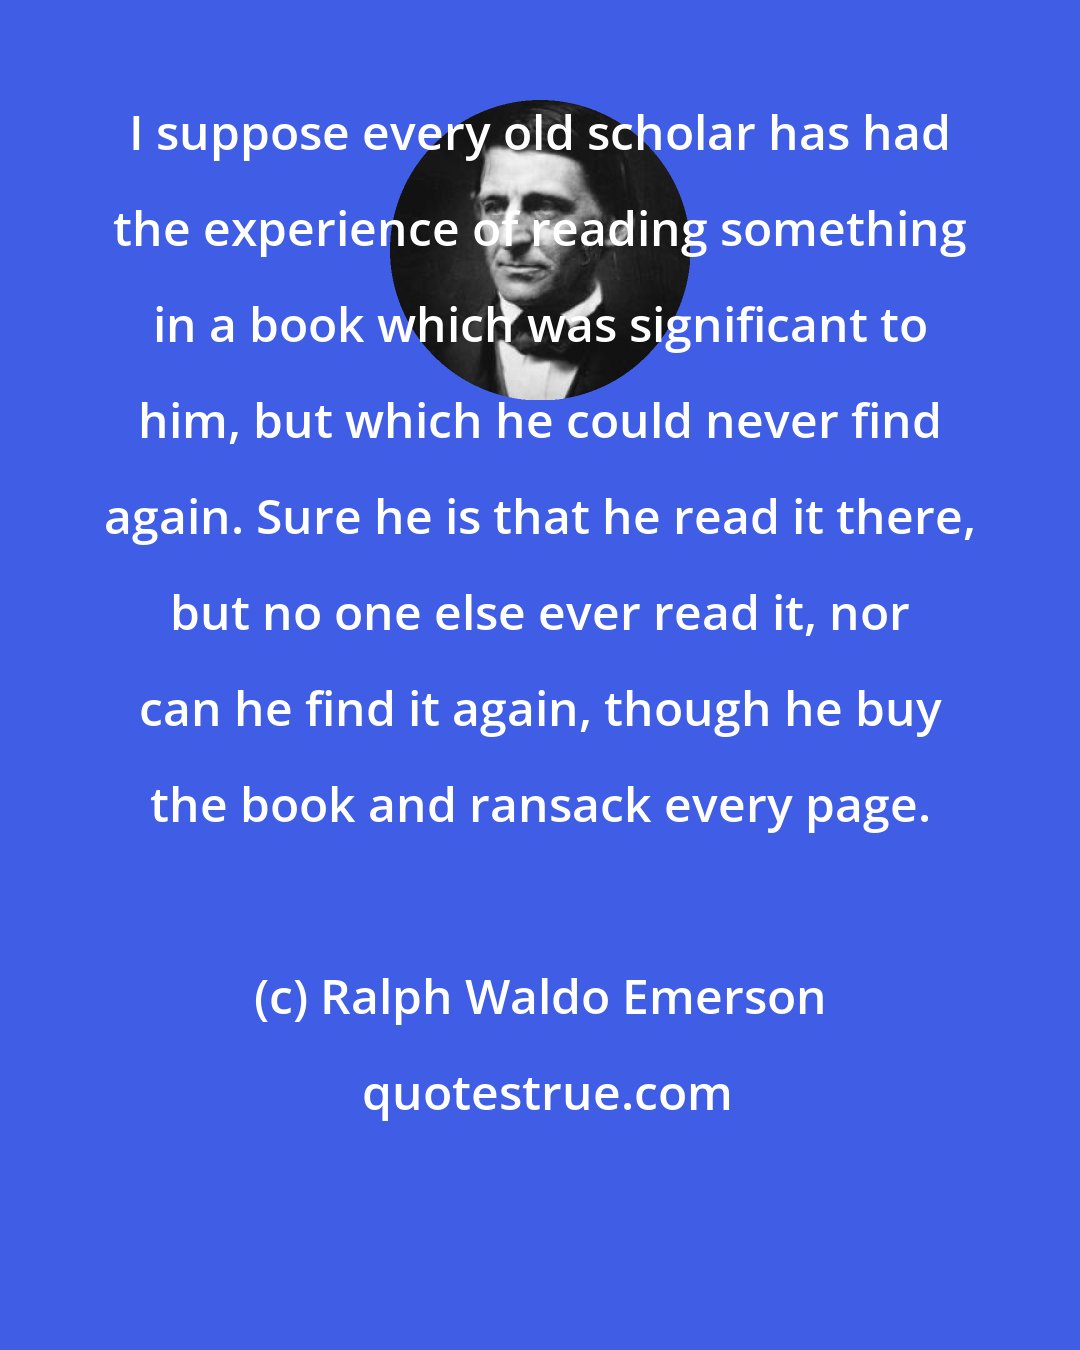 Ralph Waldo Emerson: I suppose every old scholar has had the experience of reading something in a book which was significant to him, but which he could never find again. Sure he is that he read it there, but no one else ever read it, nor can he find it again, though he buy the book and ransack every page.